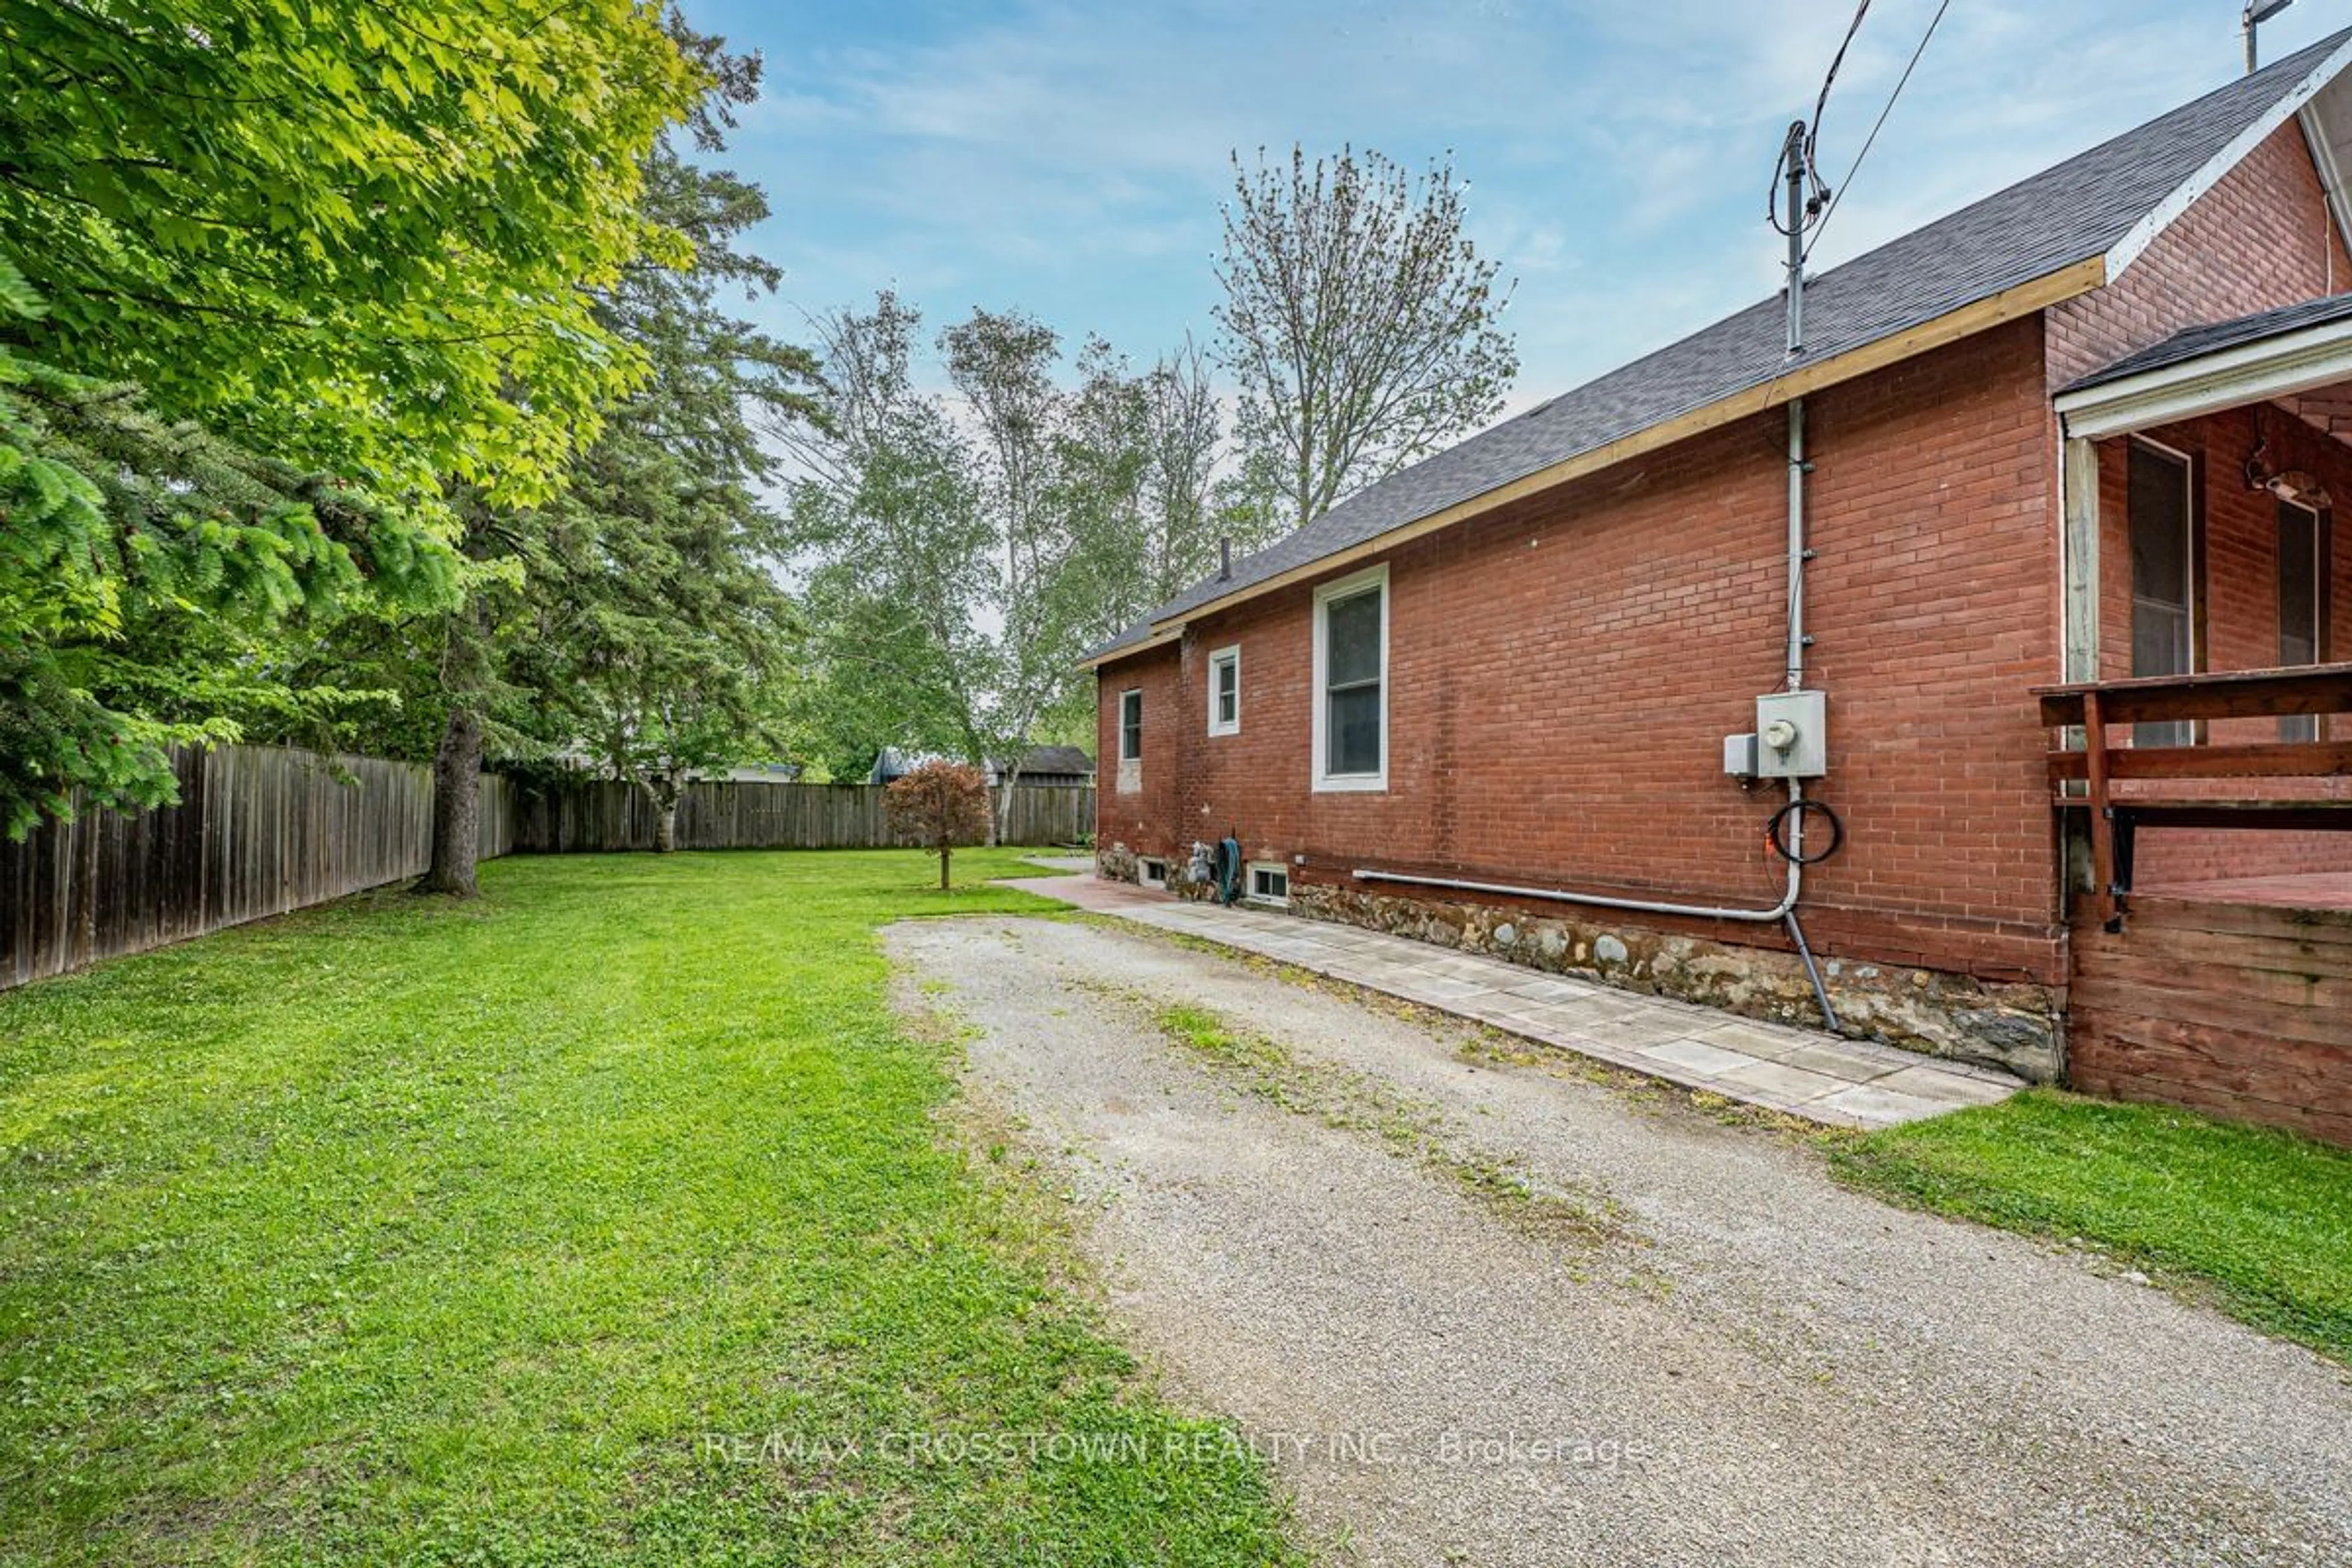 Home with brick exterior material for 87 Wellington St, New Tecumseth Ontario L9R 1G7